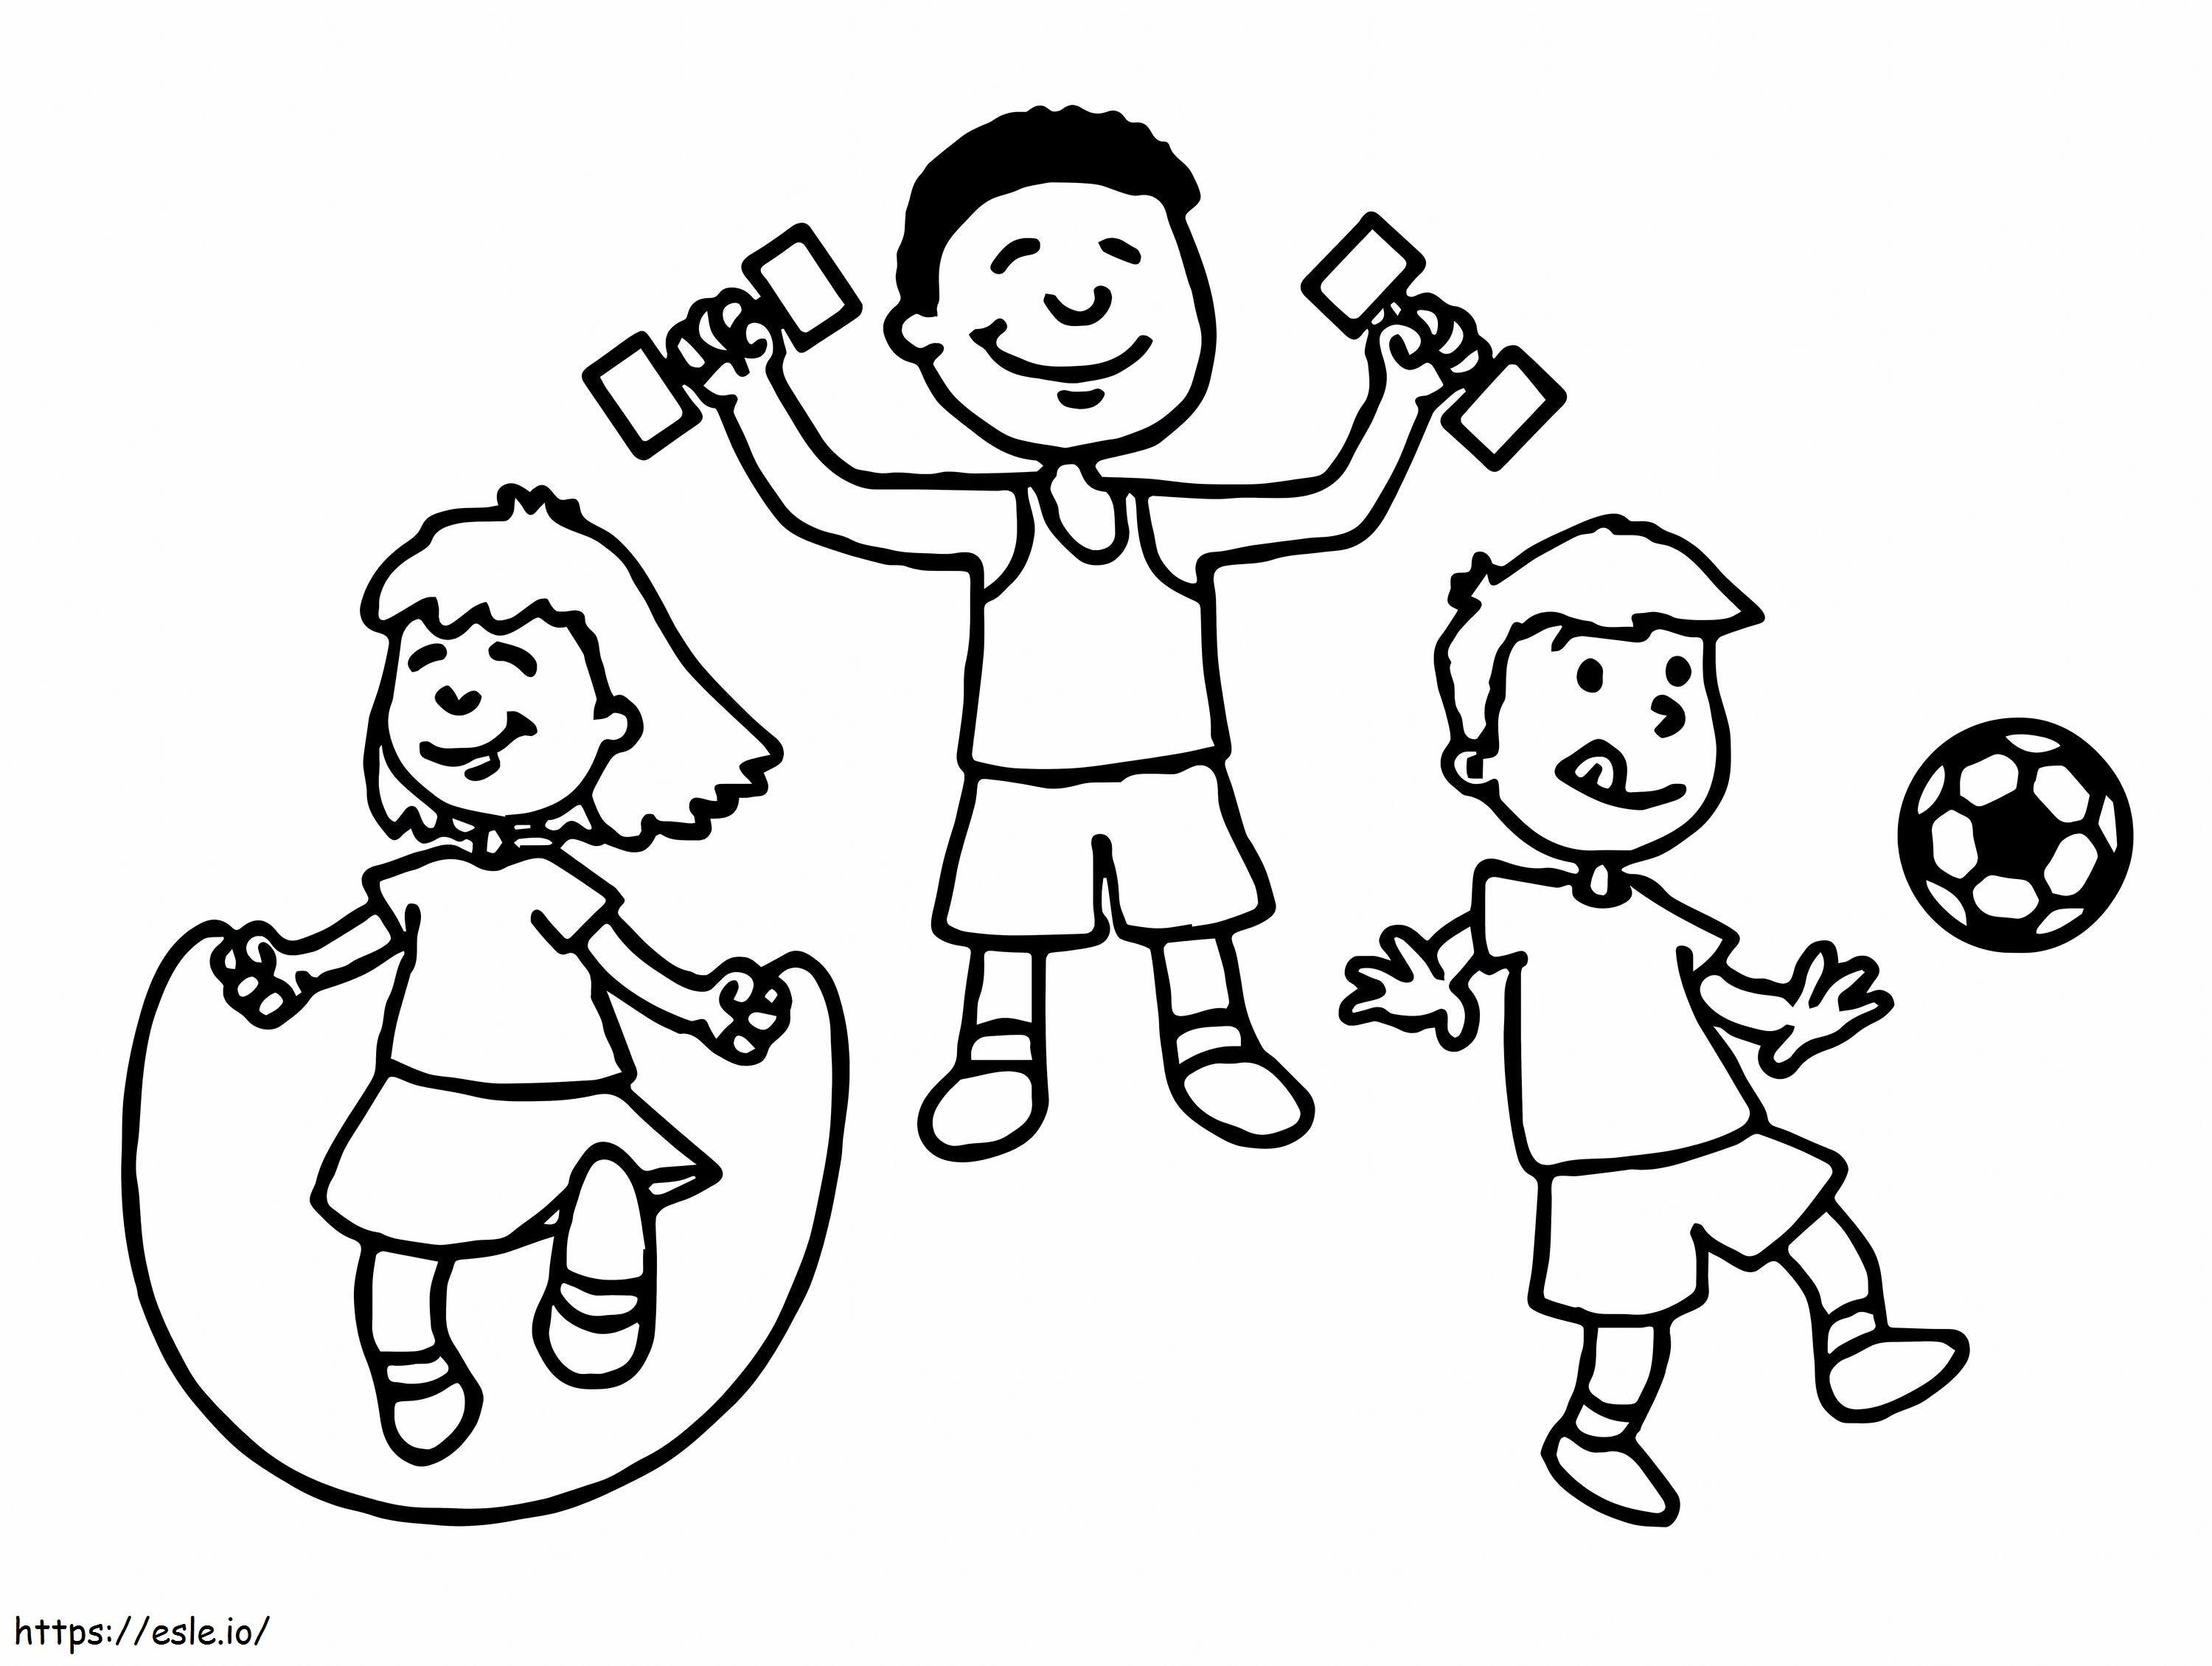 Children With Sports coloring page